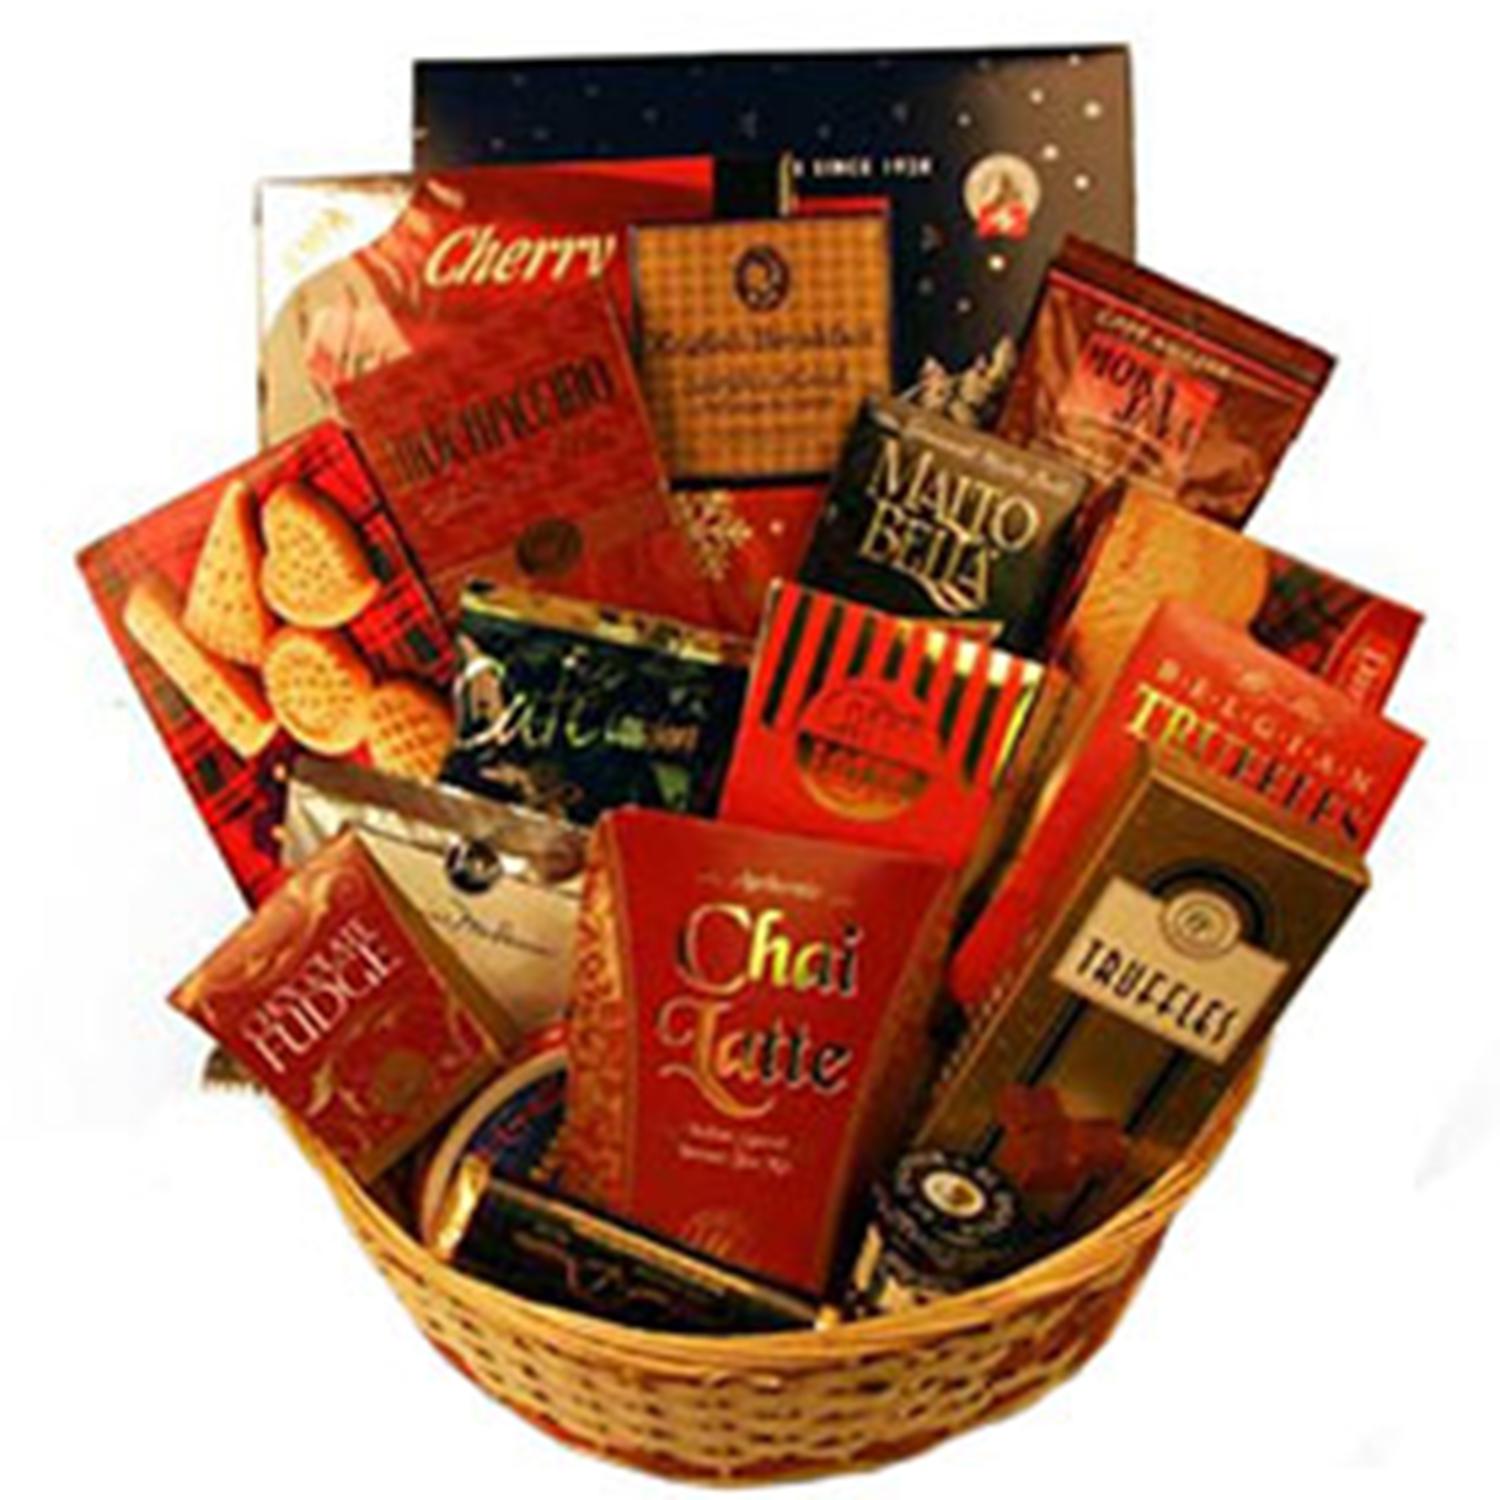 Nut-Free Gift Baskets | Healthy Snack Corporate Gifts